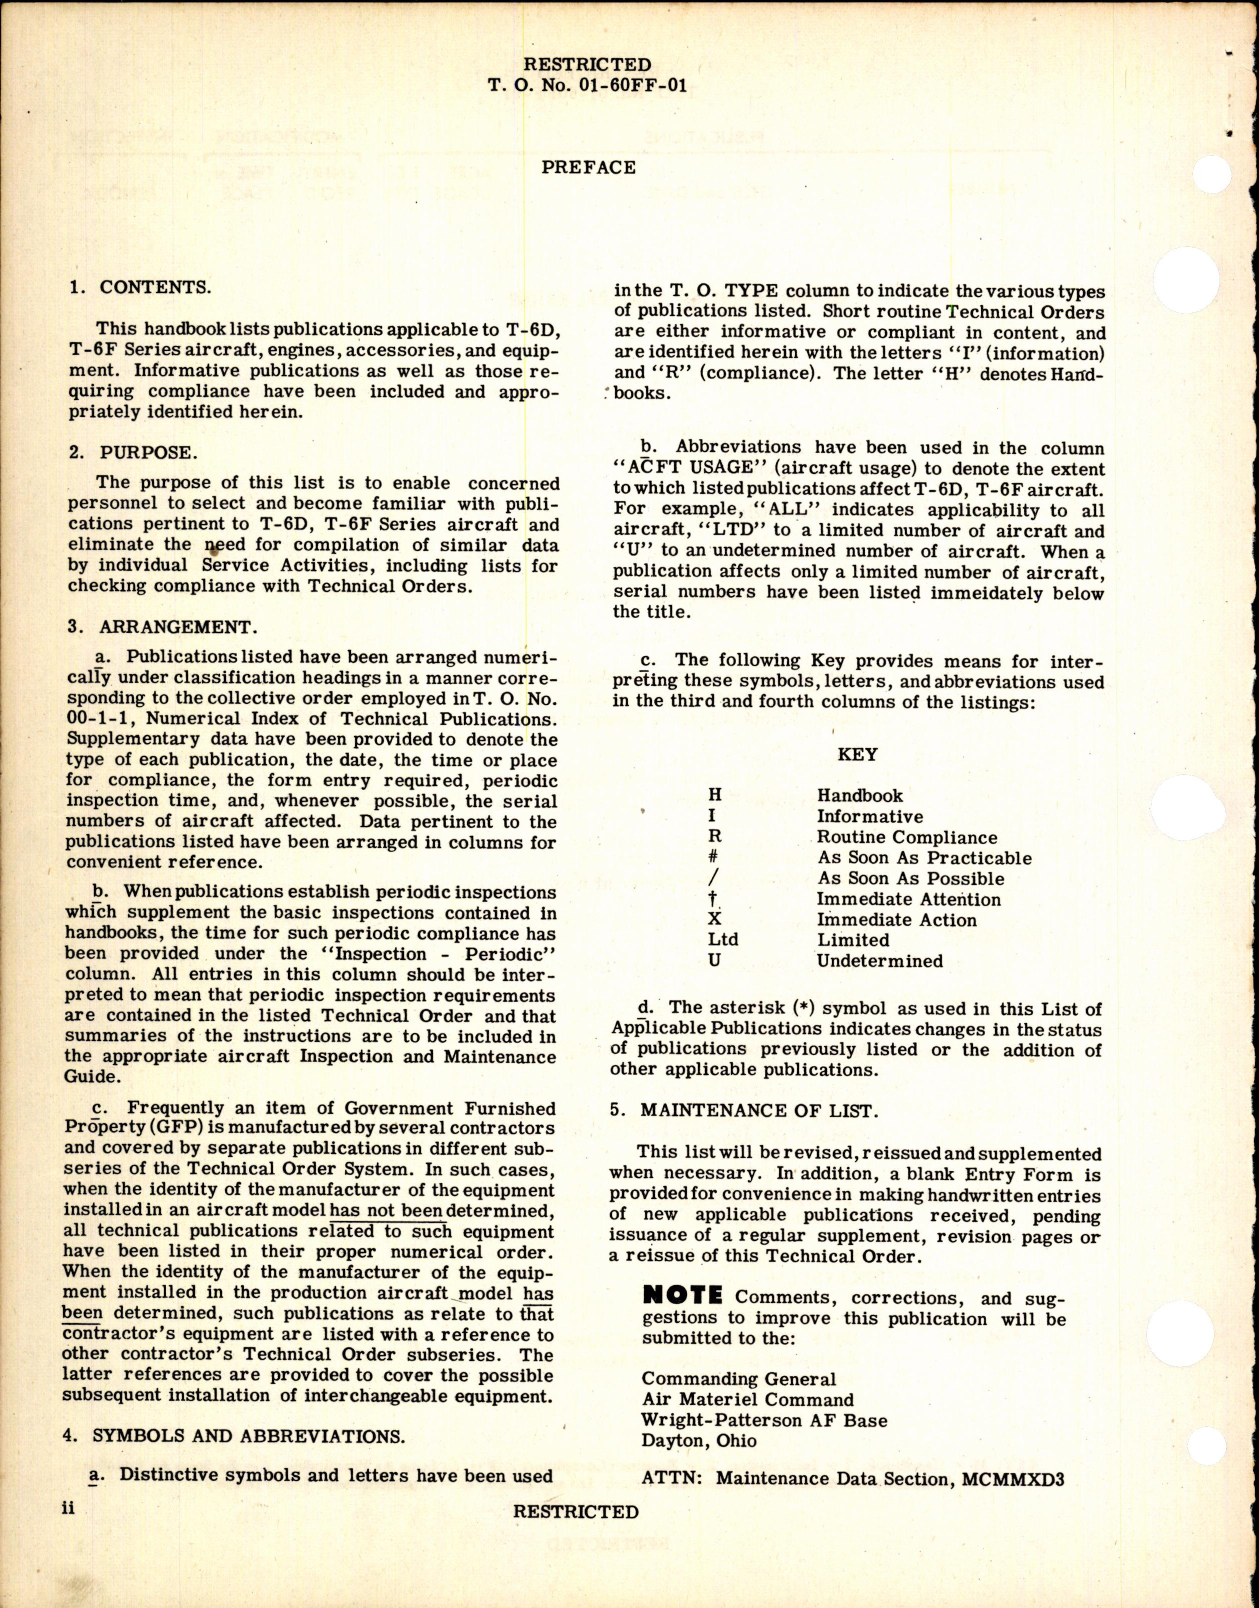 Sample page 4 from AirCorps Library document: List of Applicable Publications for T-6D, & T-6F 